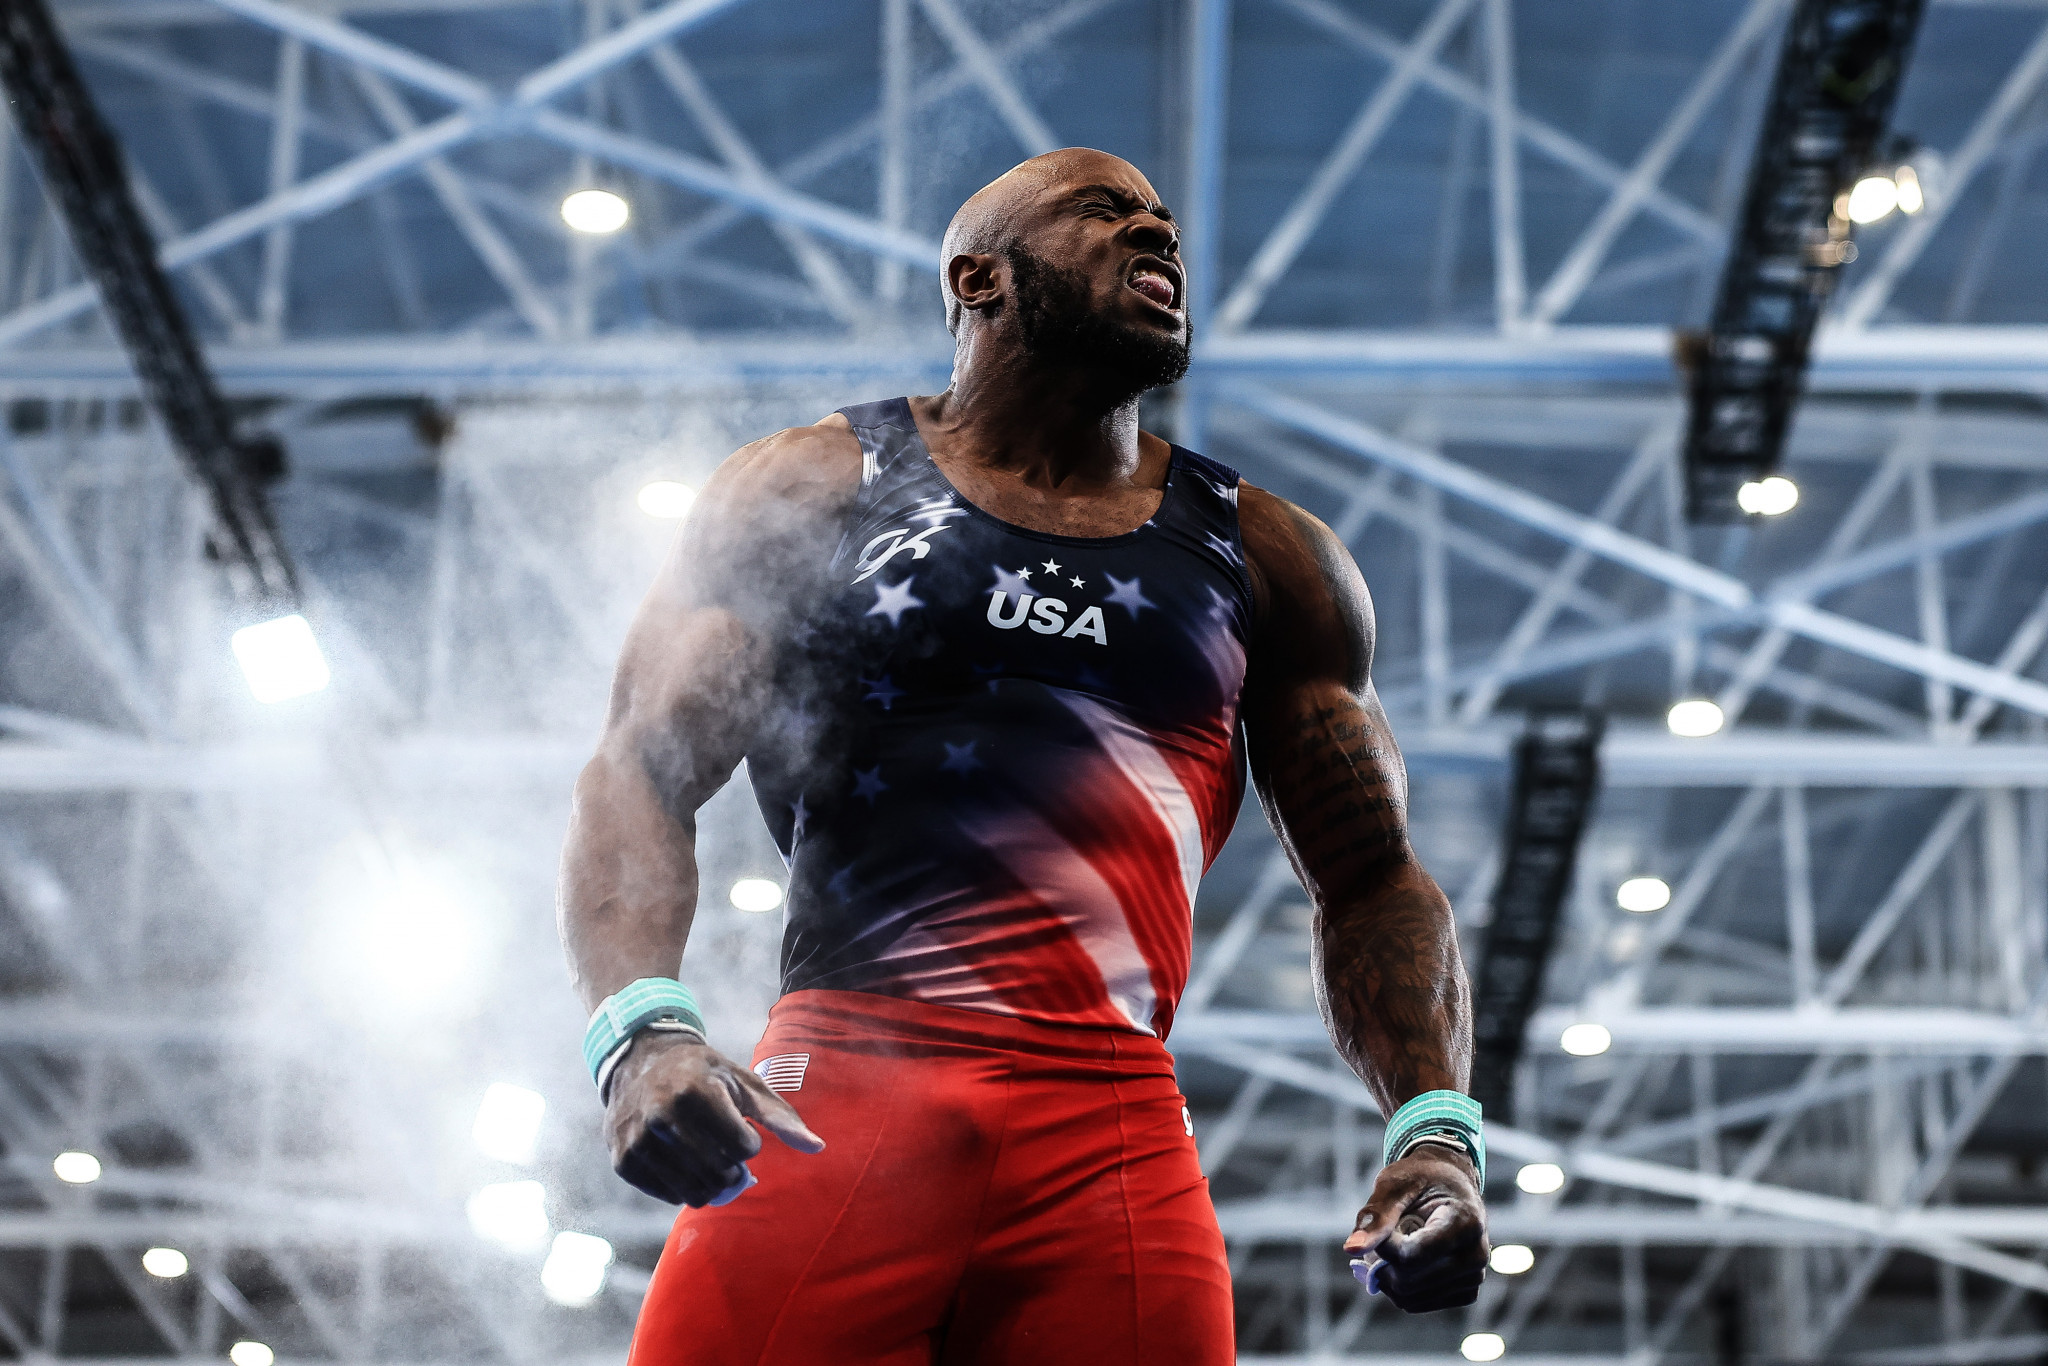 Donnell Whittenburg celebrates his rings gold in a cloud of chalk ©Getty Images